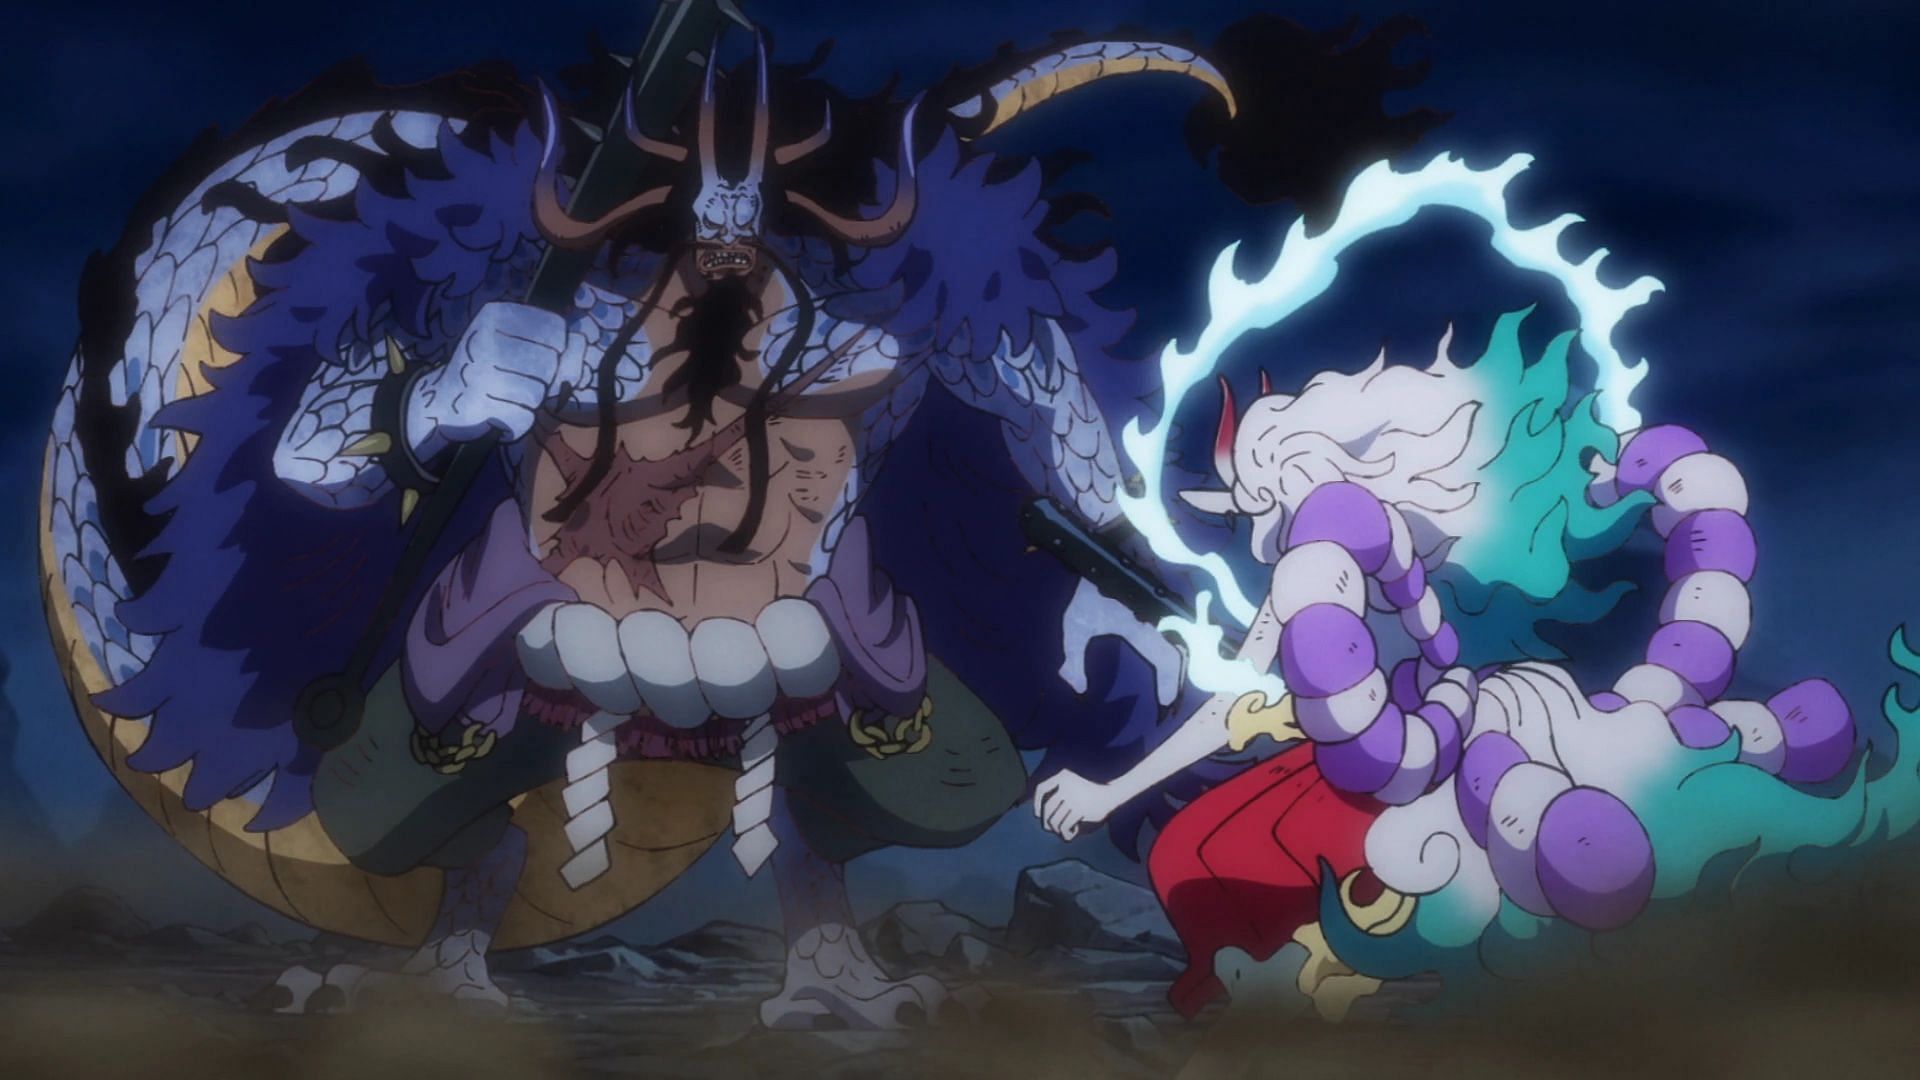 The Ogres Kaido and Yamato as seen in One Piece (Image via Toei Animation)